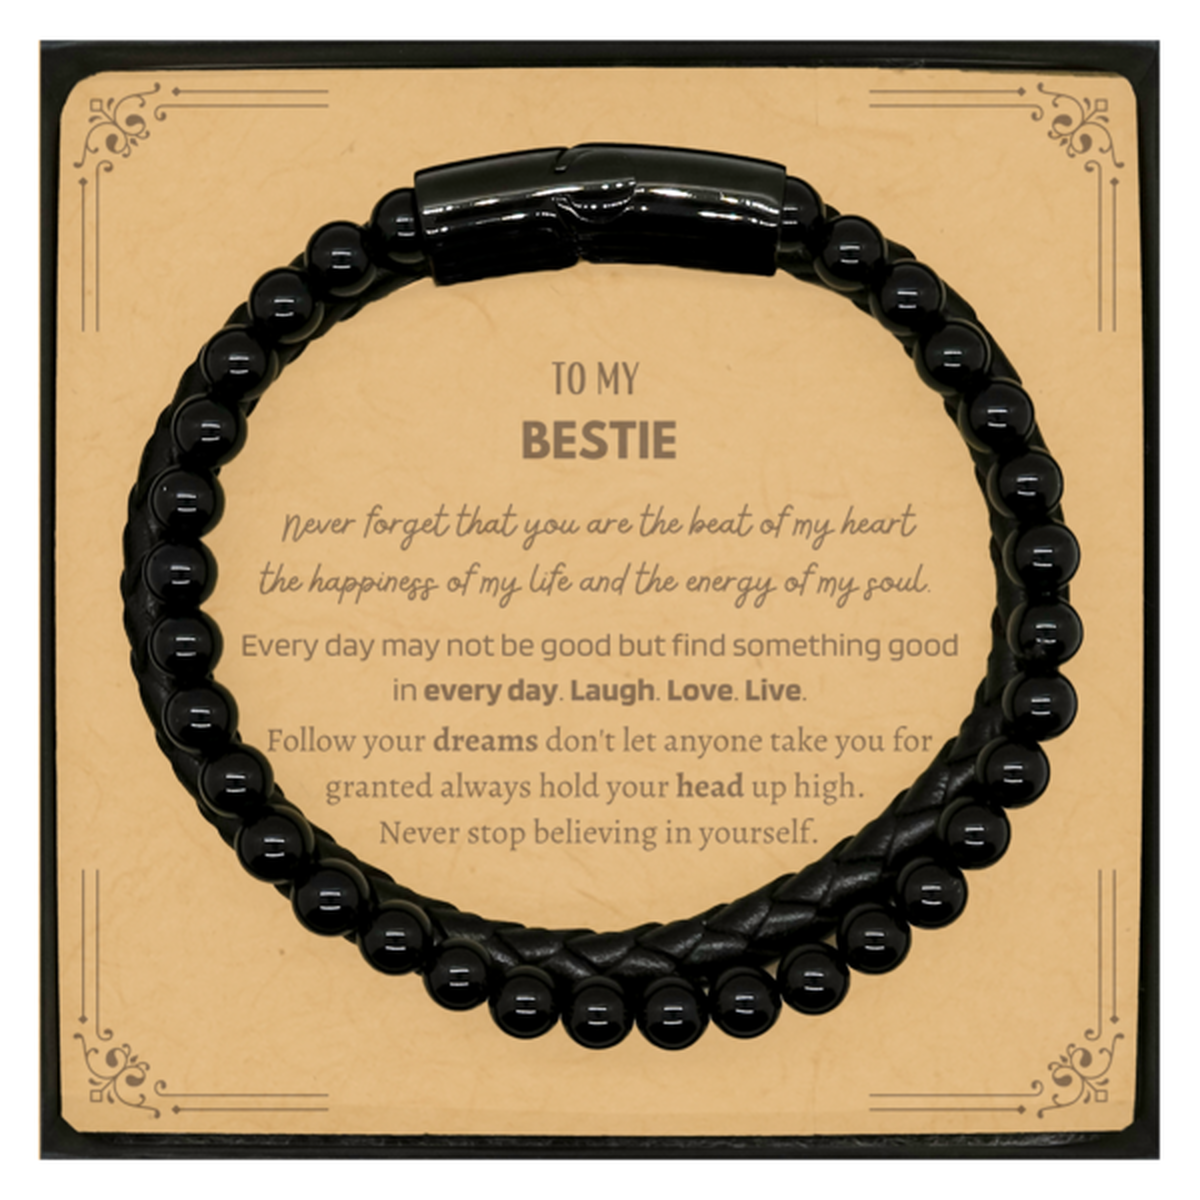 To My Bestie Message Card Gifts, Christmas Bestie Stone Leather Bracelets Present, Birthday Unique Motivational For Bestie, To My Bestie Never forget that you are the beat of my heart the happiness of my life and the energy of my soul